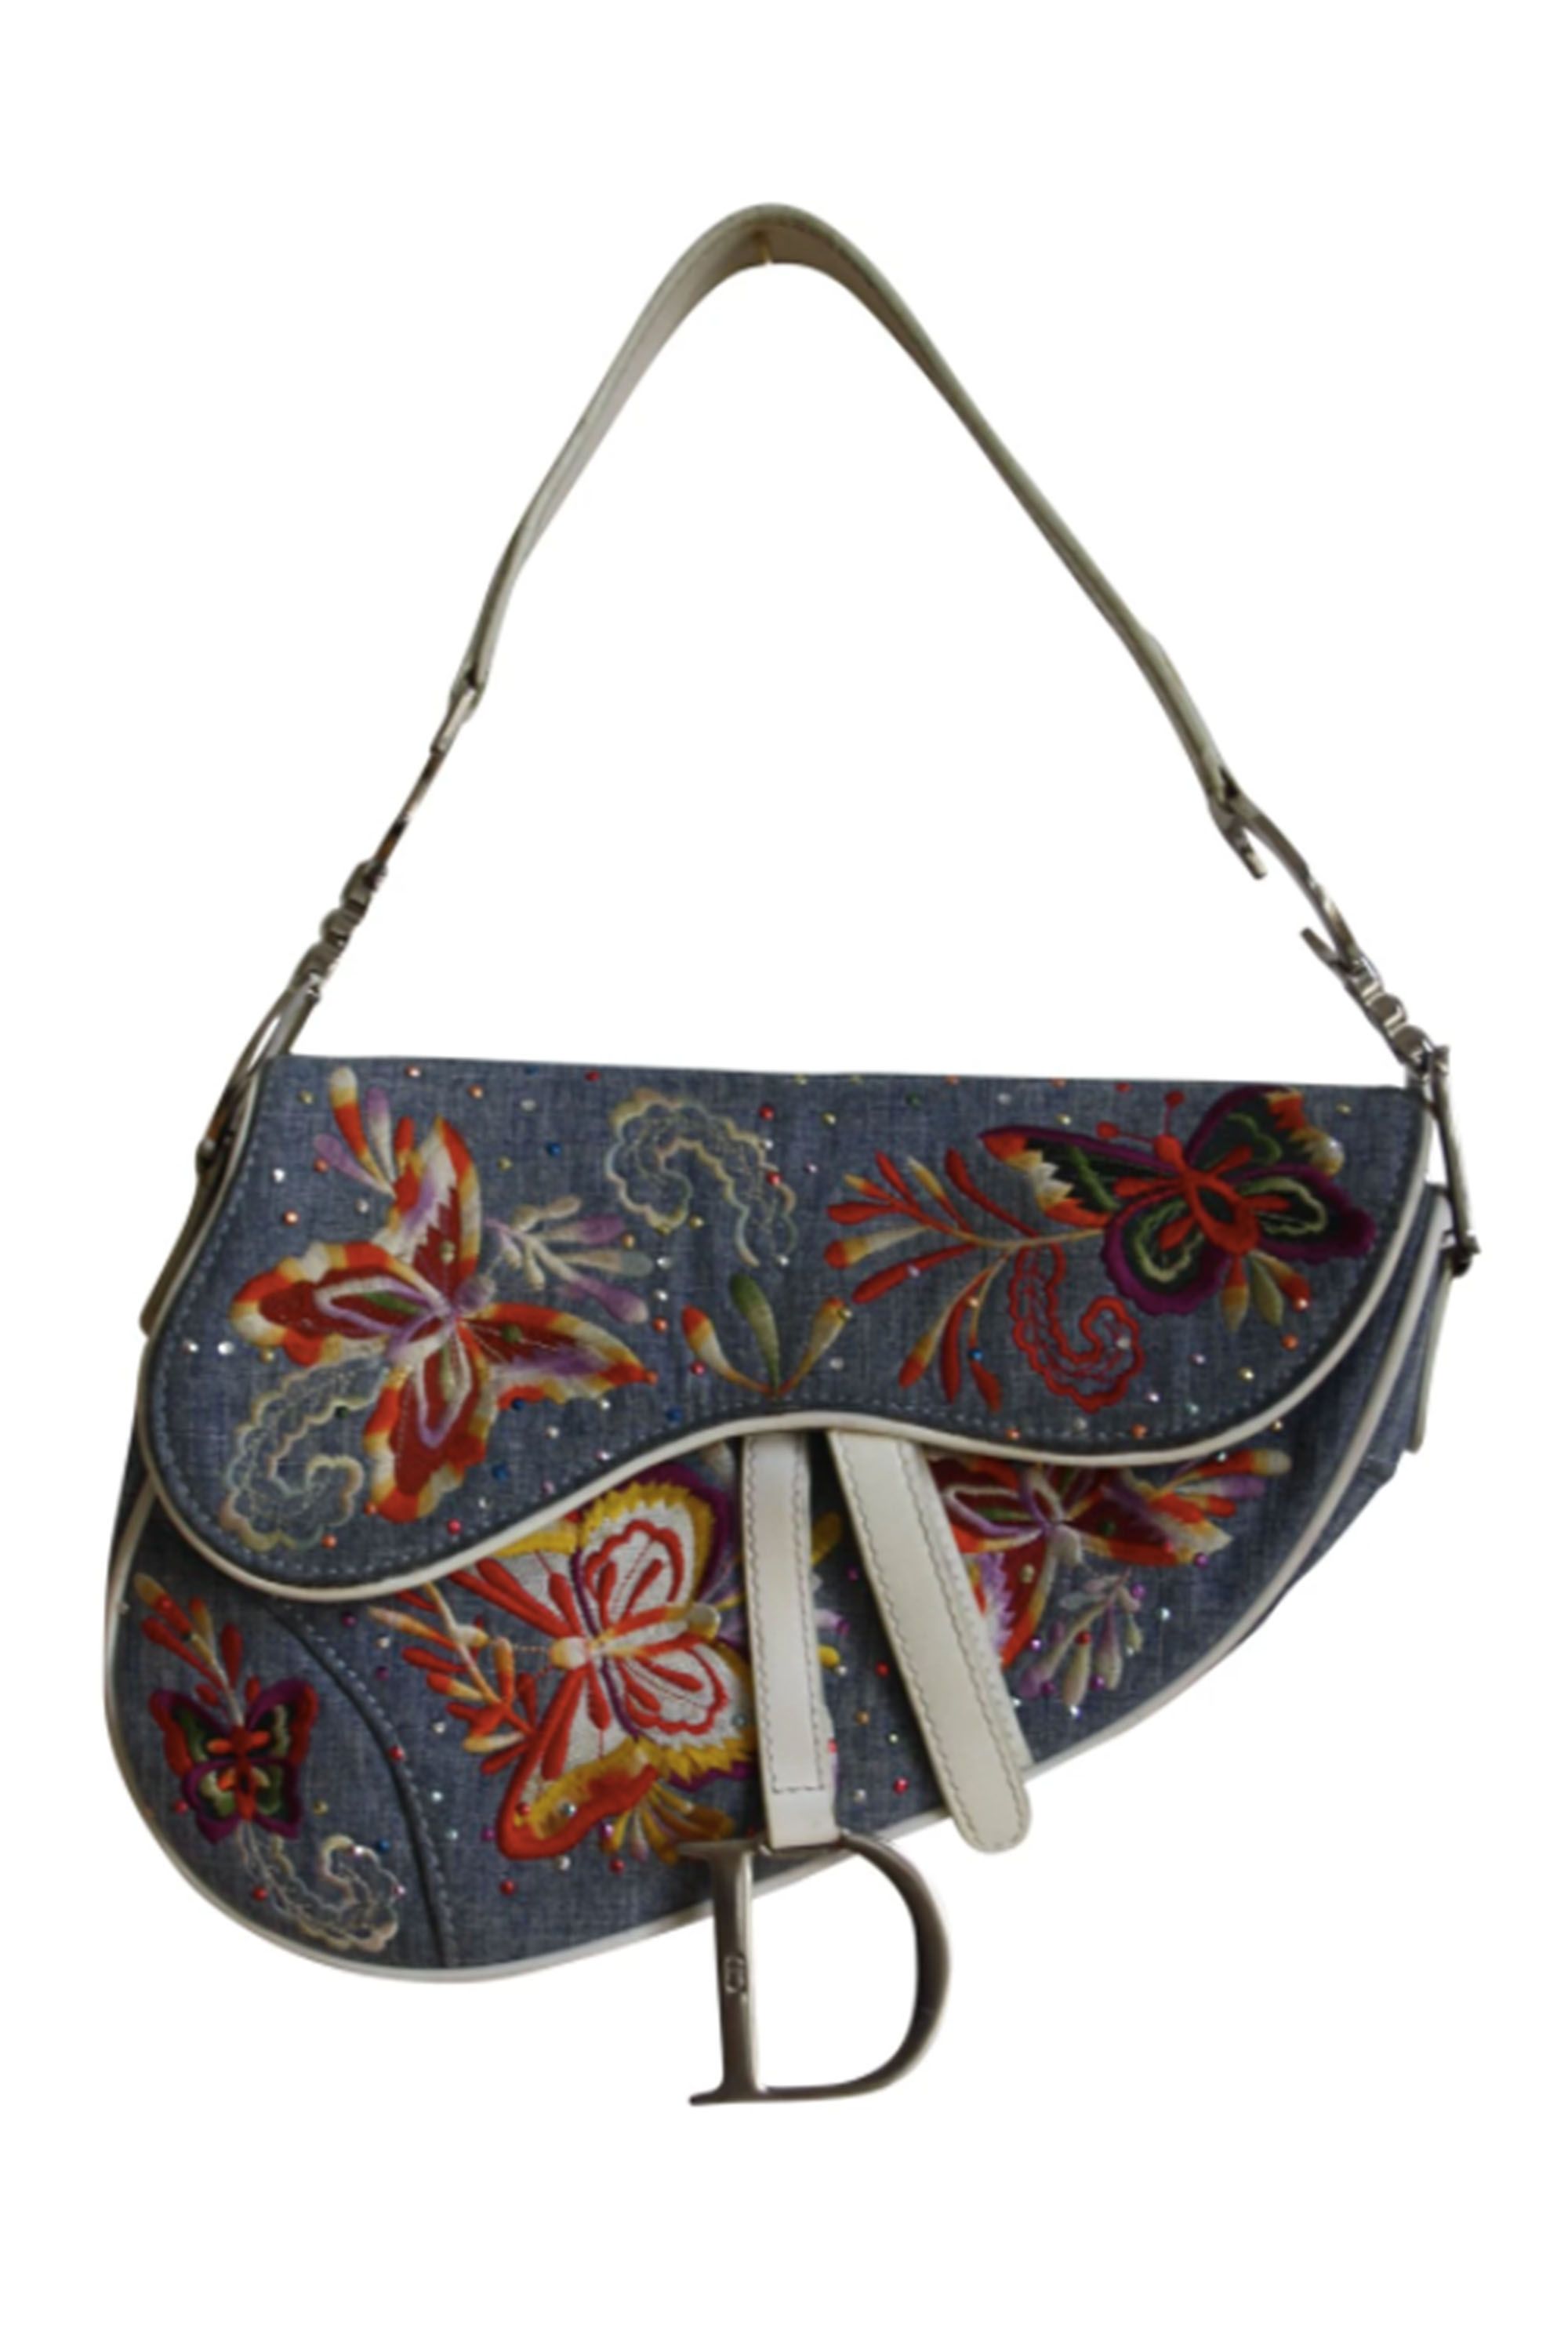 dior saddle bag butterfly